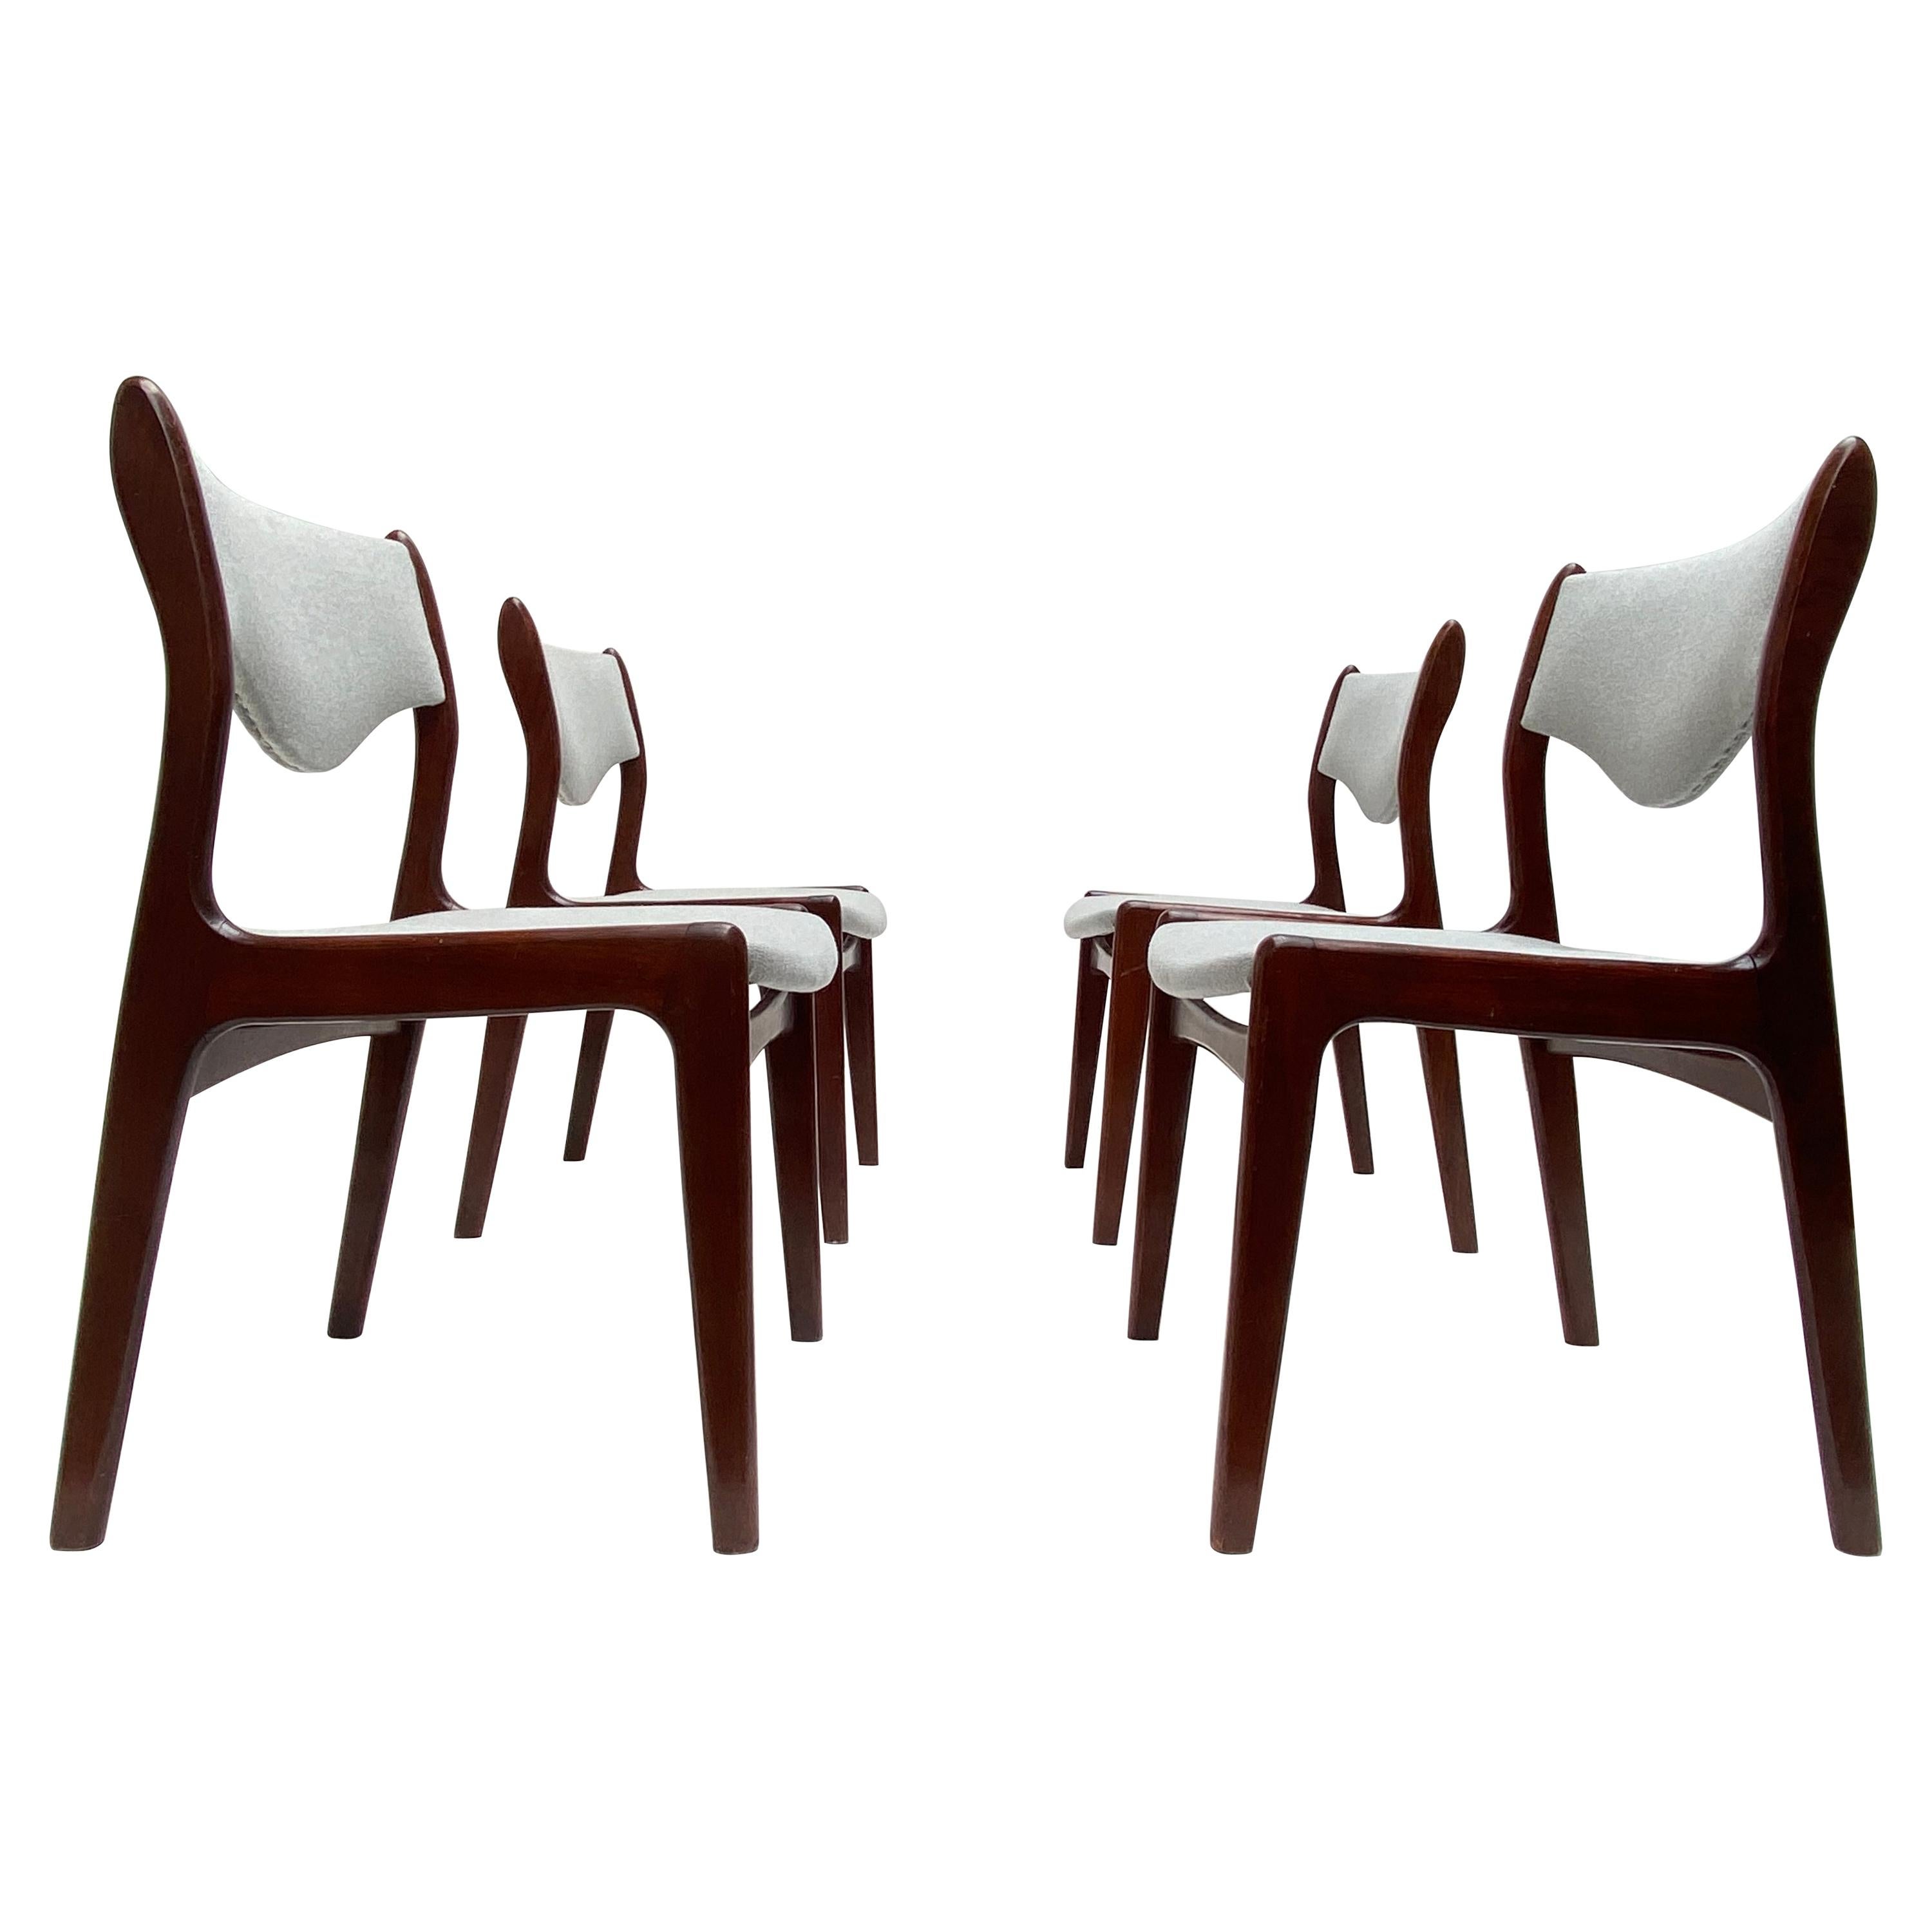 Johannes Andersen Set of 4 Solid Teak Dining Chairs produced by Mahjongg, 1960's